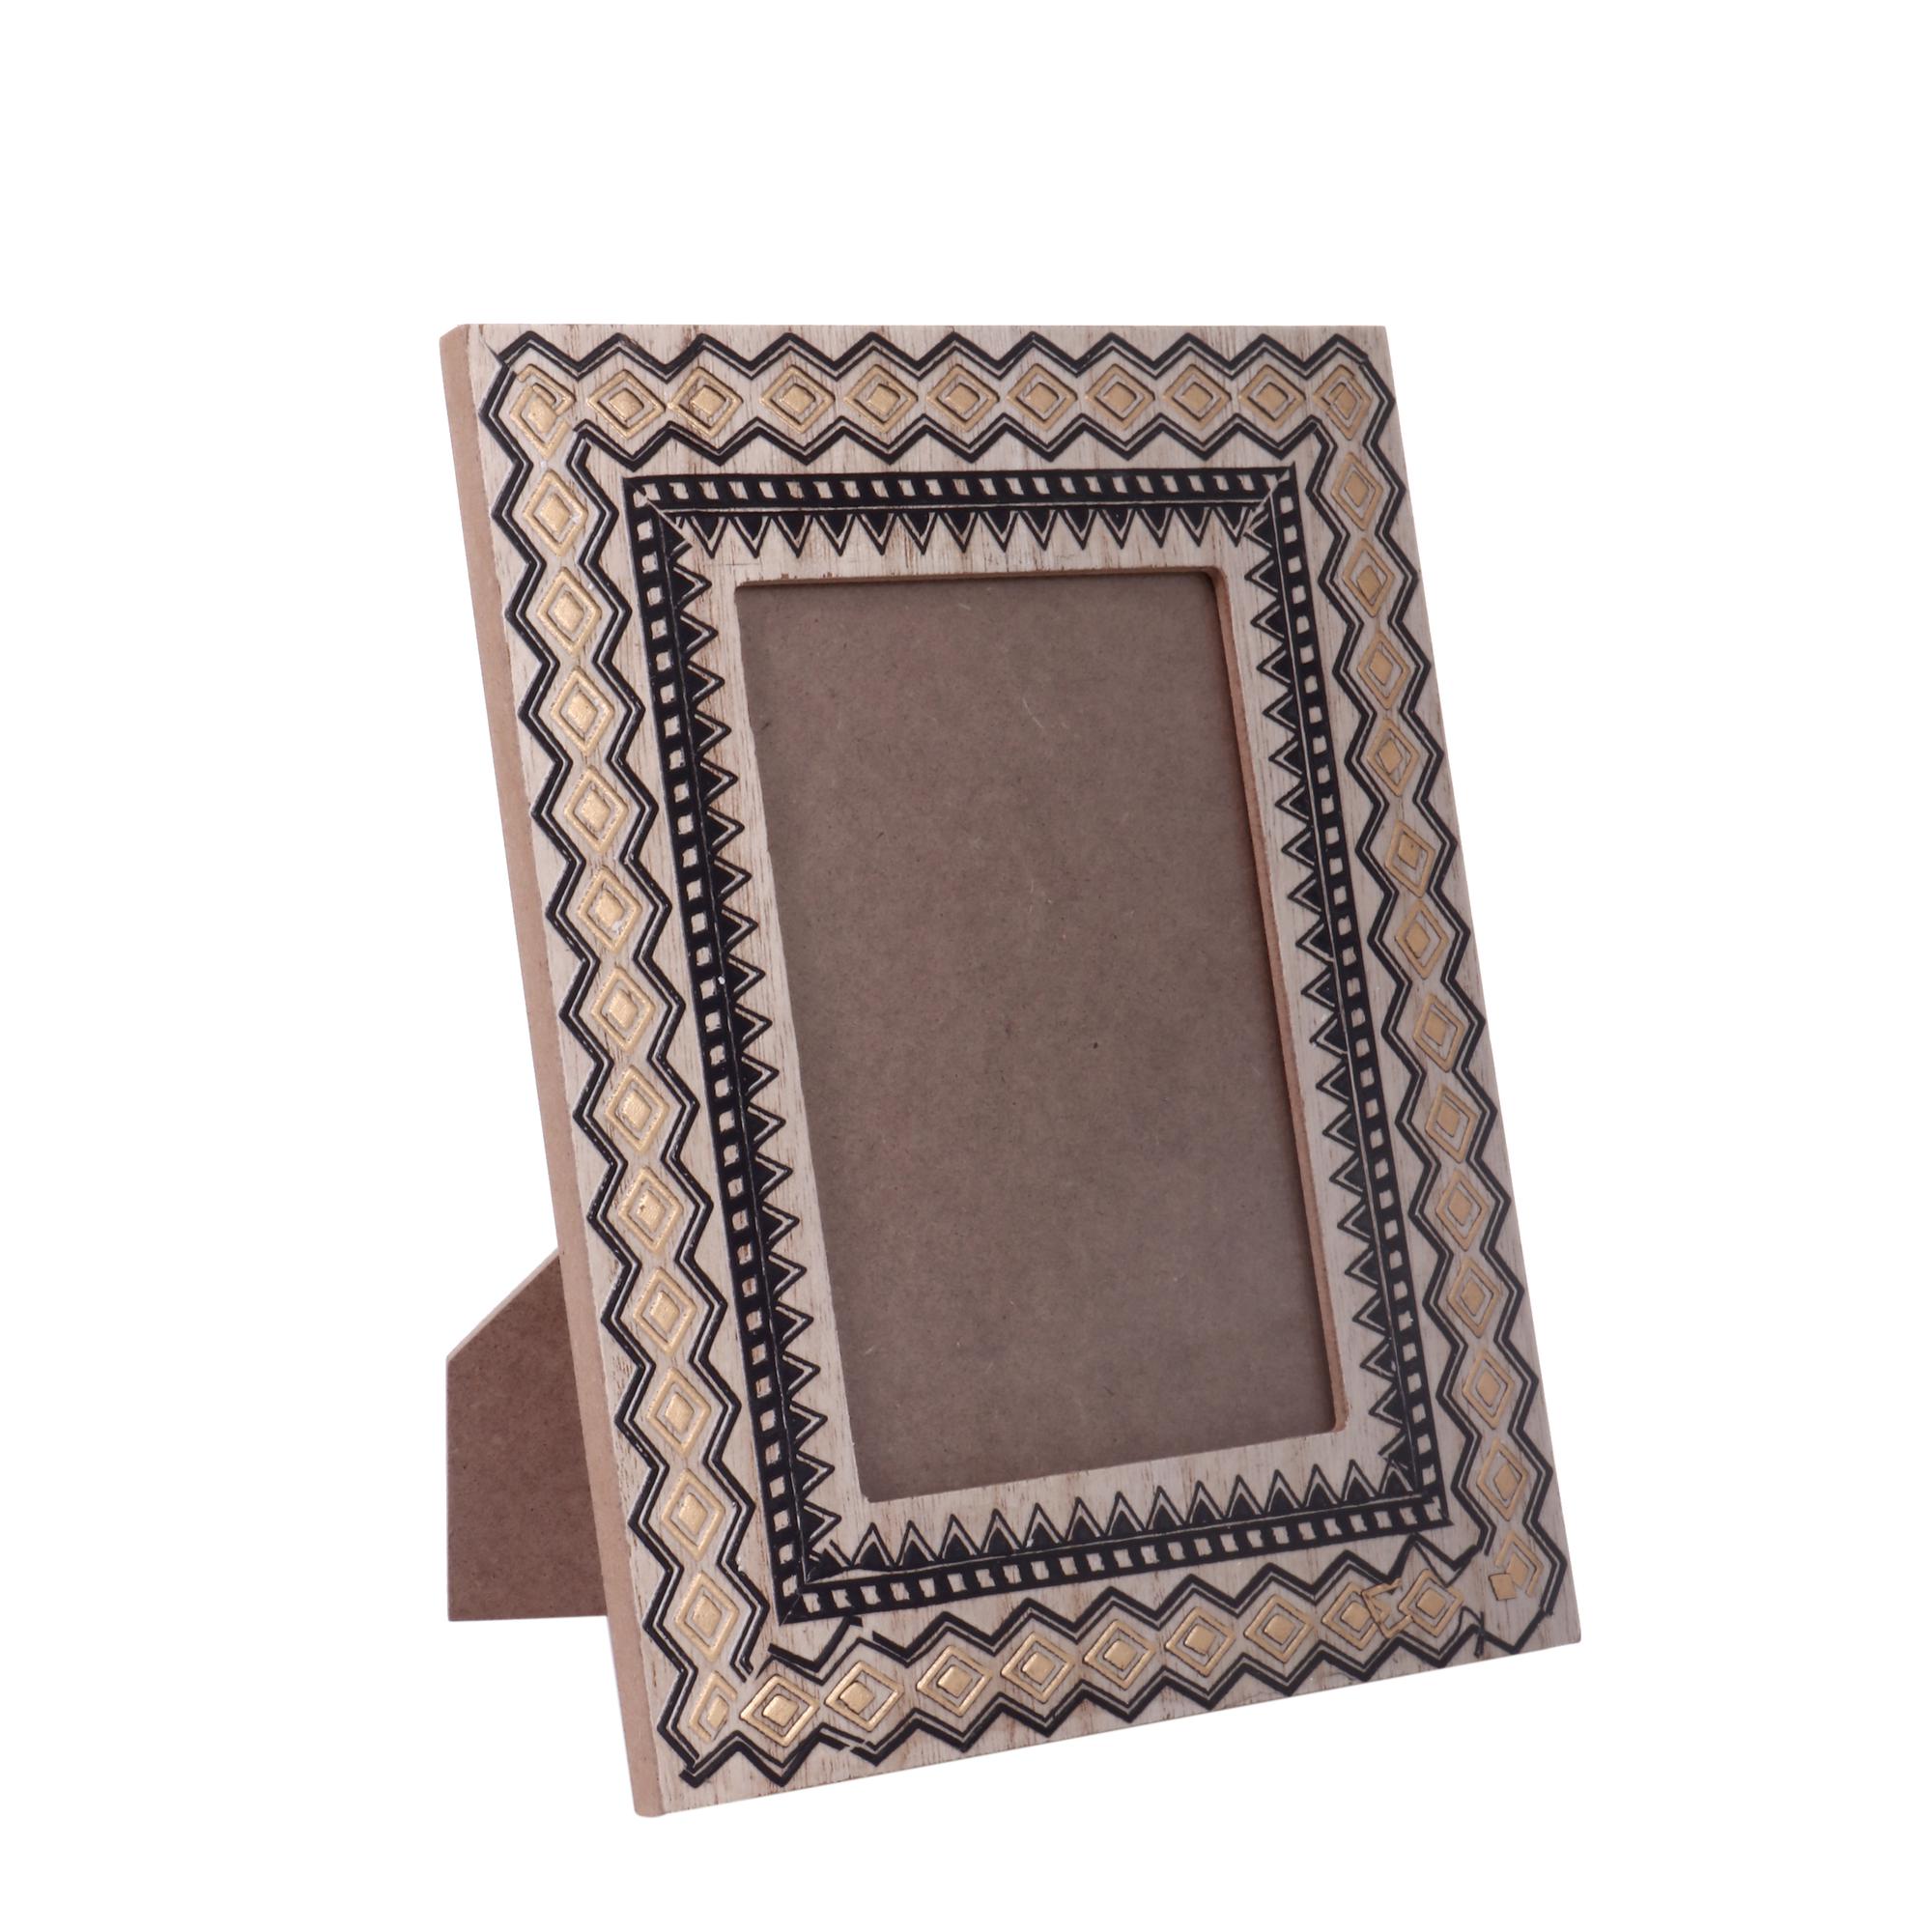 PICTURE FRAME 4X6 - 531-29143